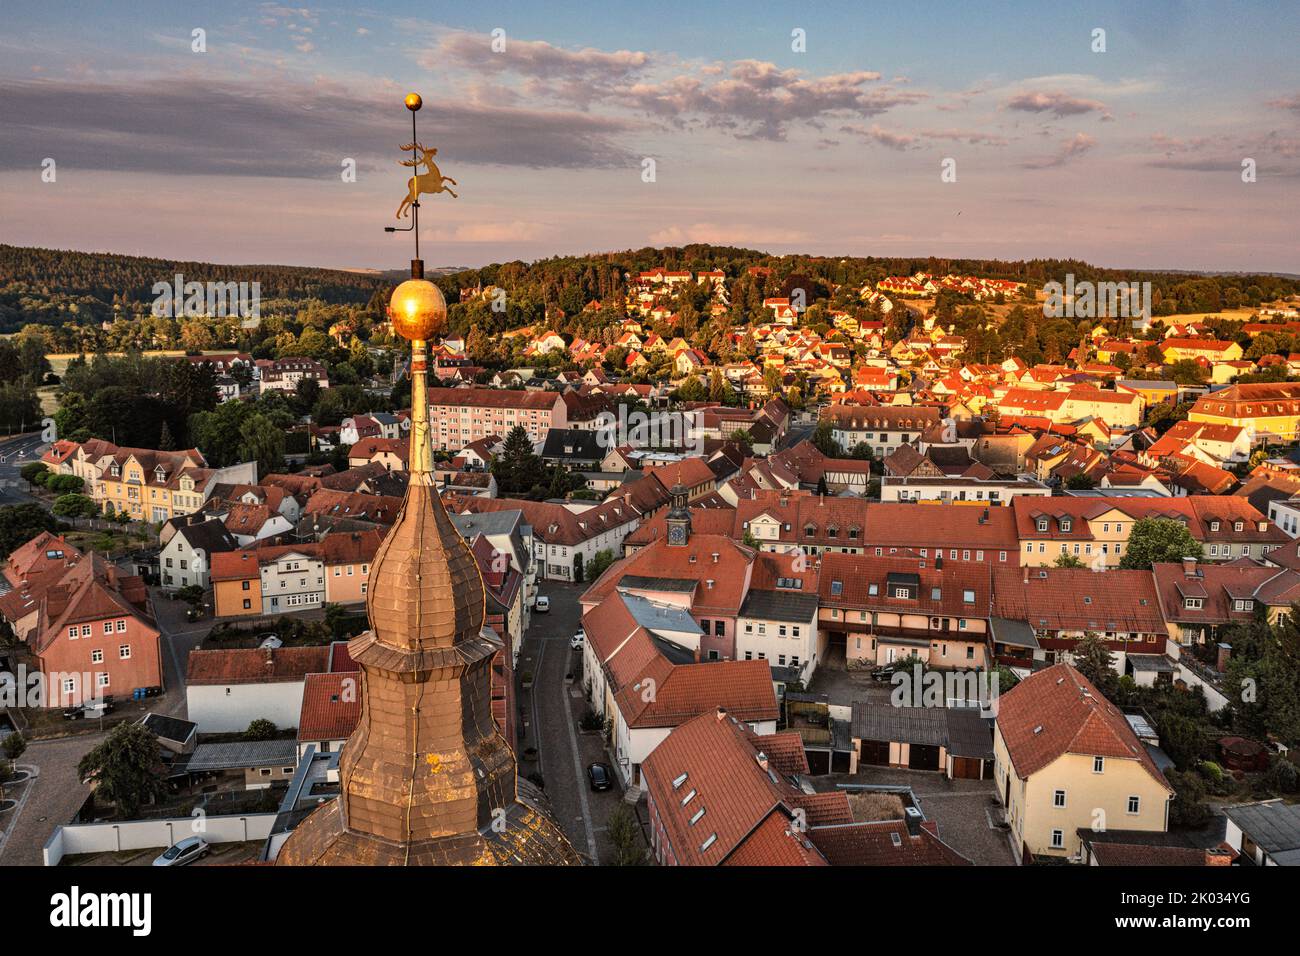 Germany, Thuringia, Bad Berka, church spire, weather vane (jumping deer), city, overview, morning light Stock Photo